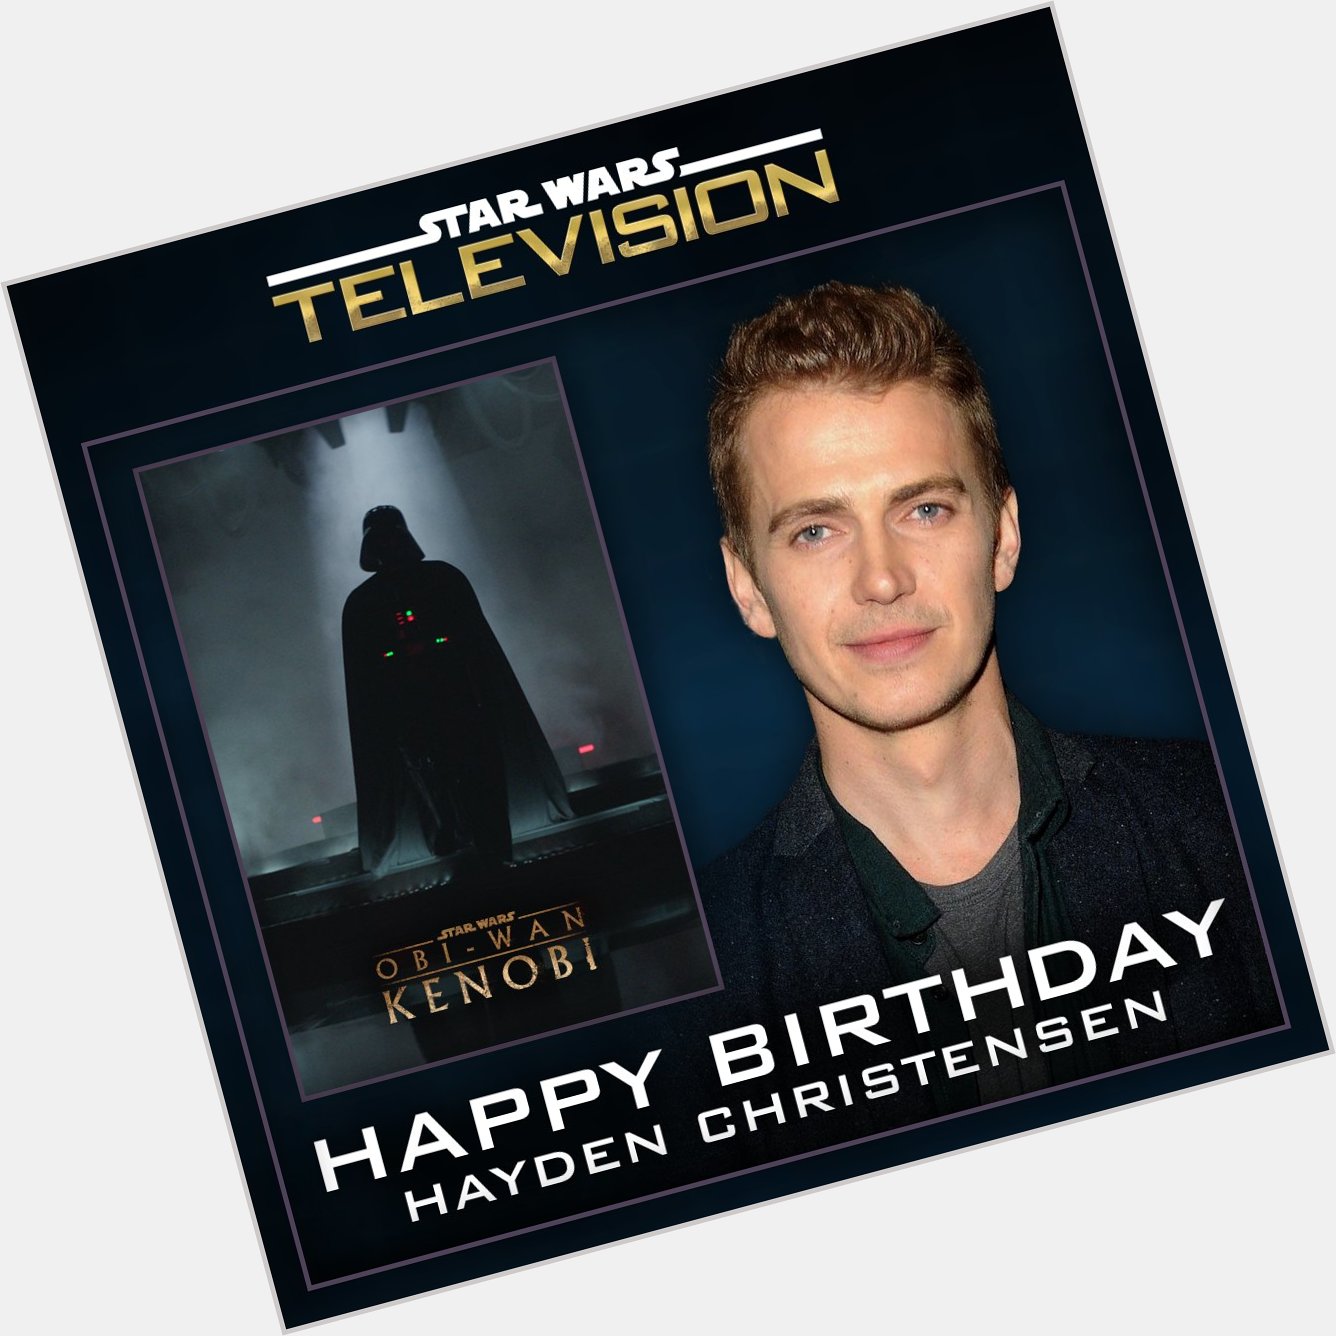 Happy birthday to Hayden Christensen, who will be reprising his role as in   